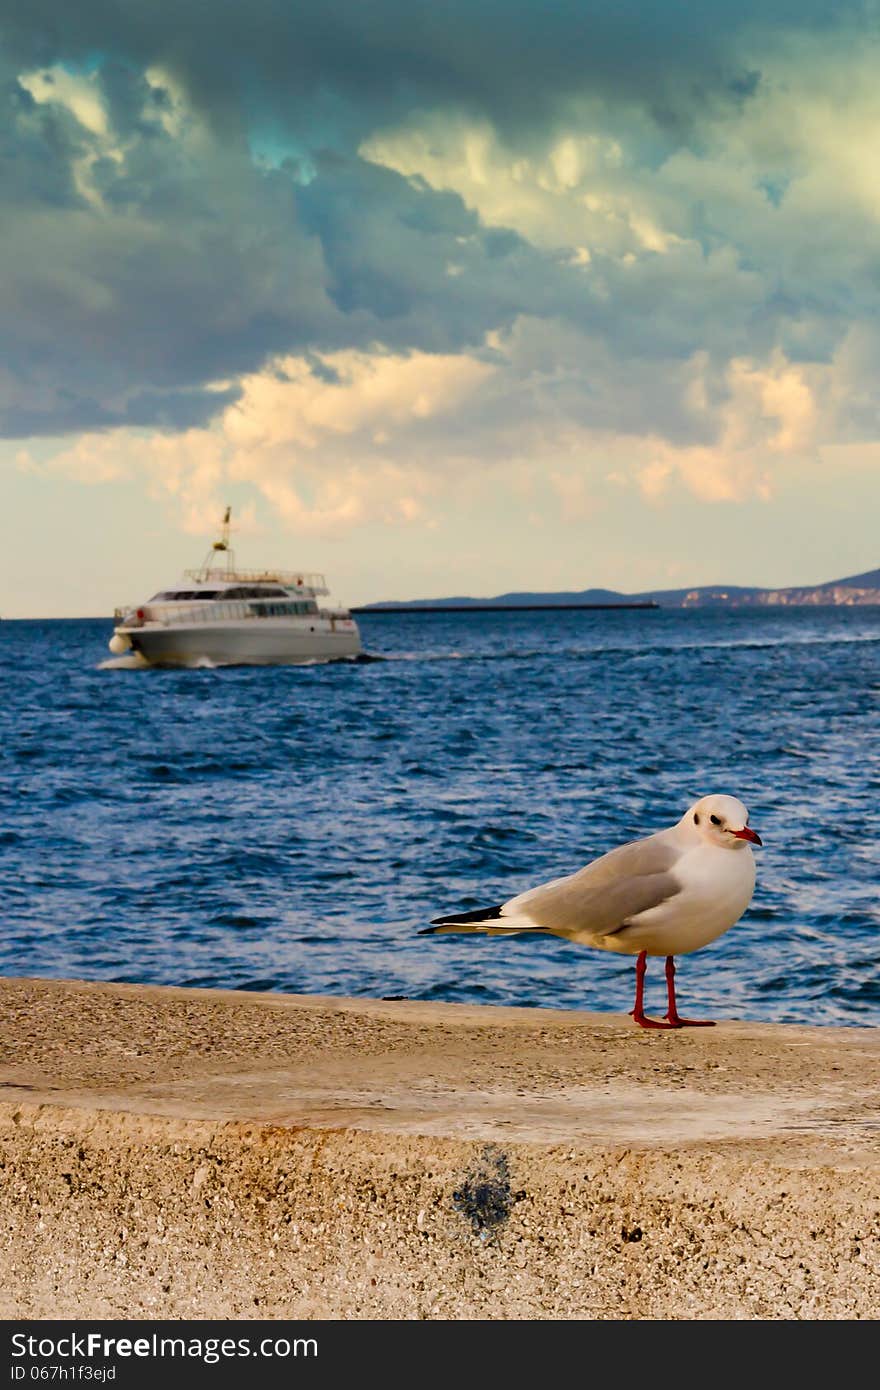 A seagull in the bay of Trieste, Italy. A seagull in the bay of Trieste, Italy